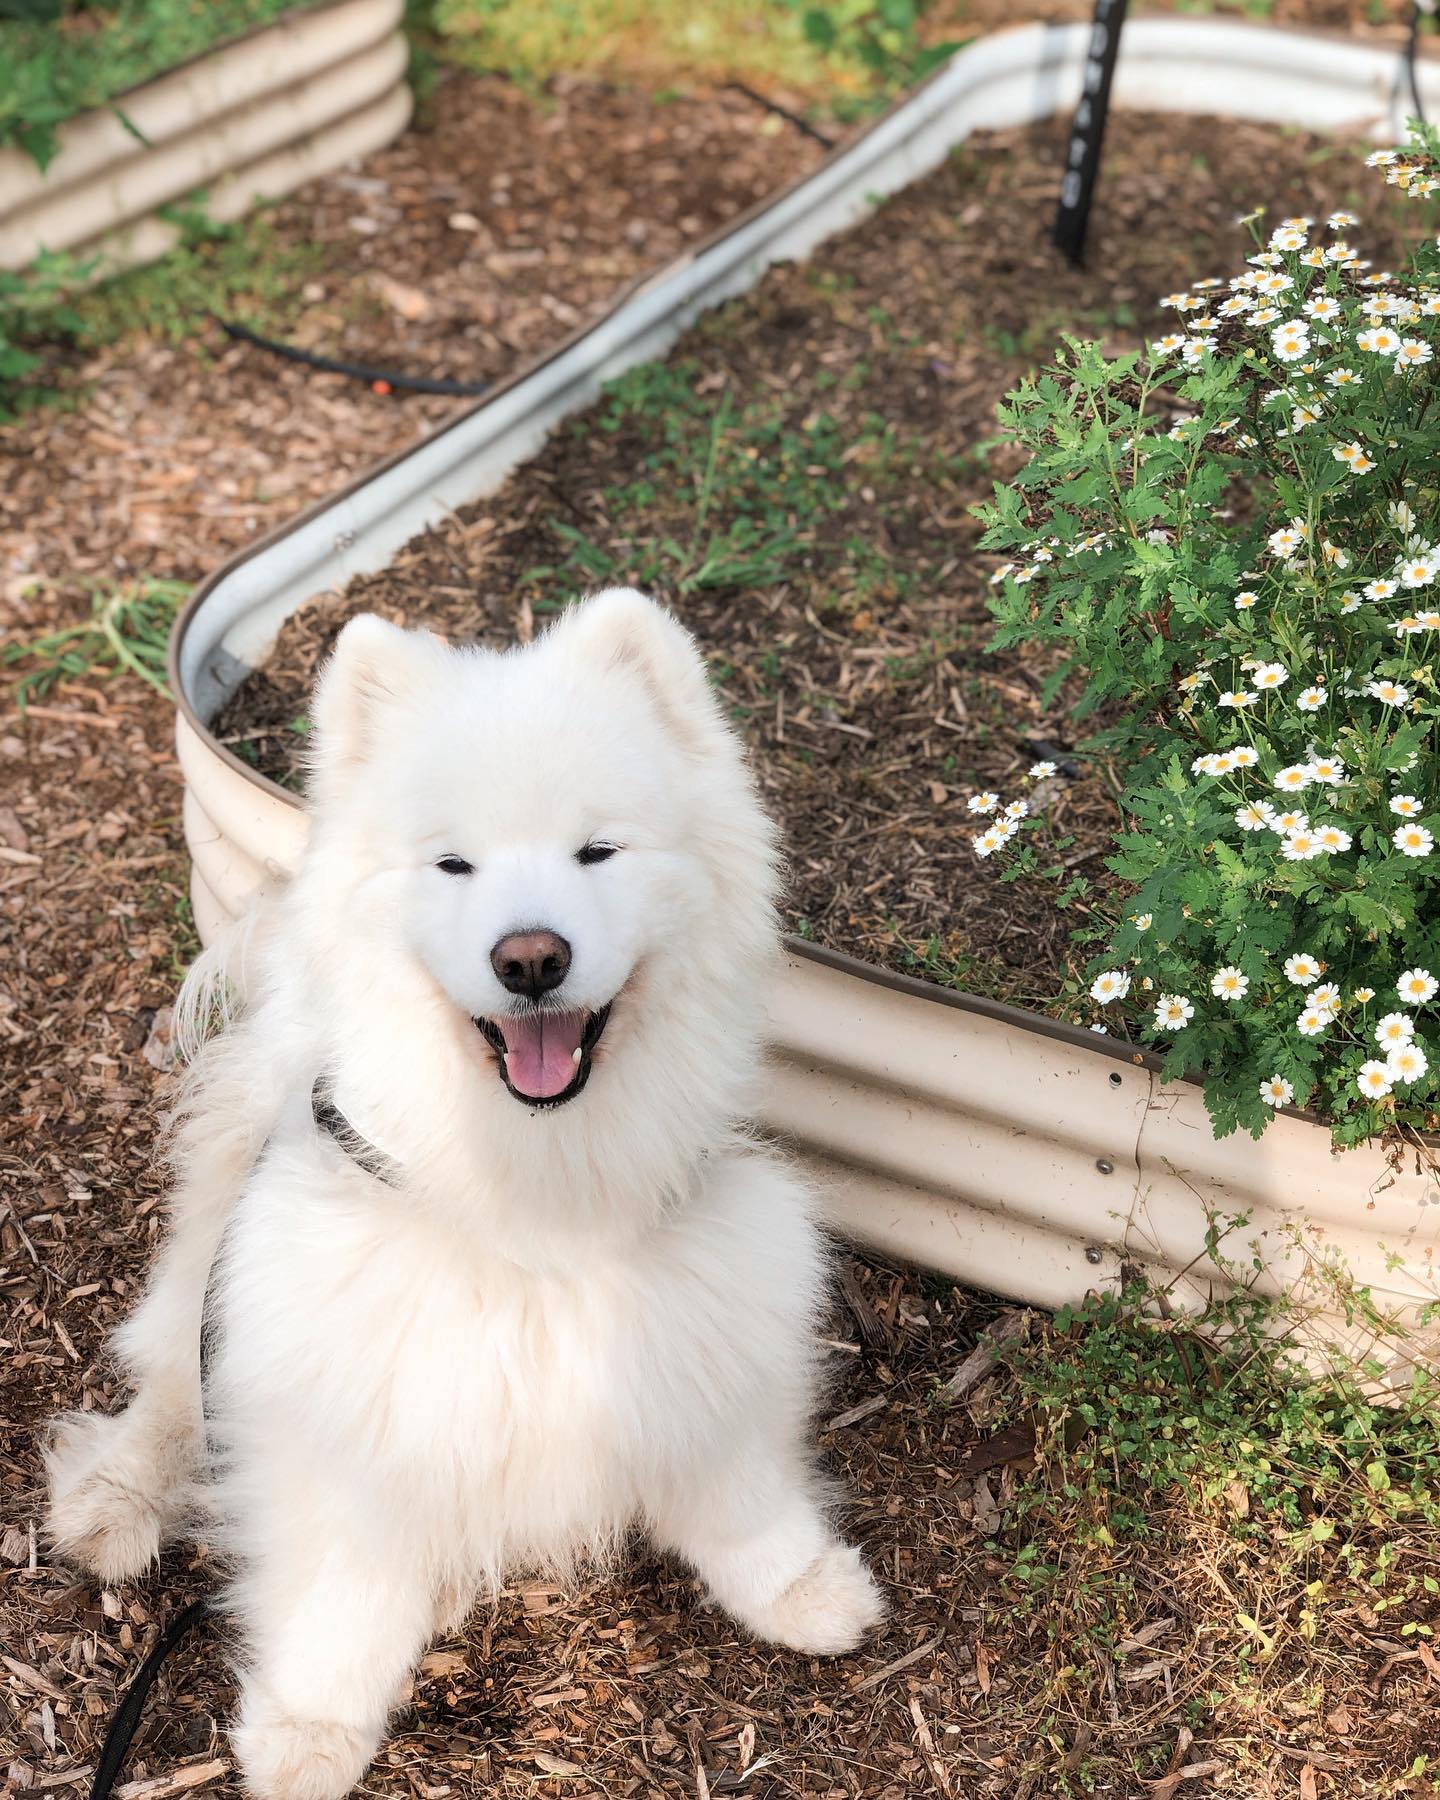 Lexi the Samoyed dog sitting happily by a garden